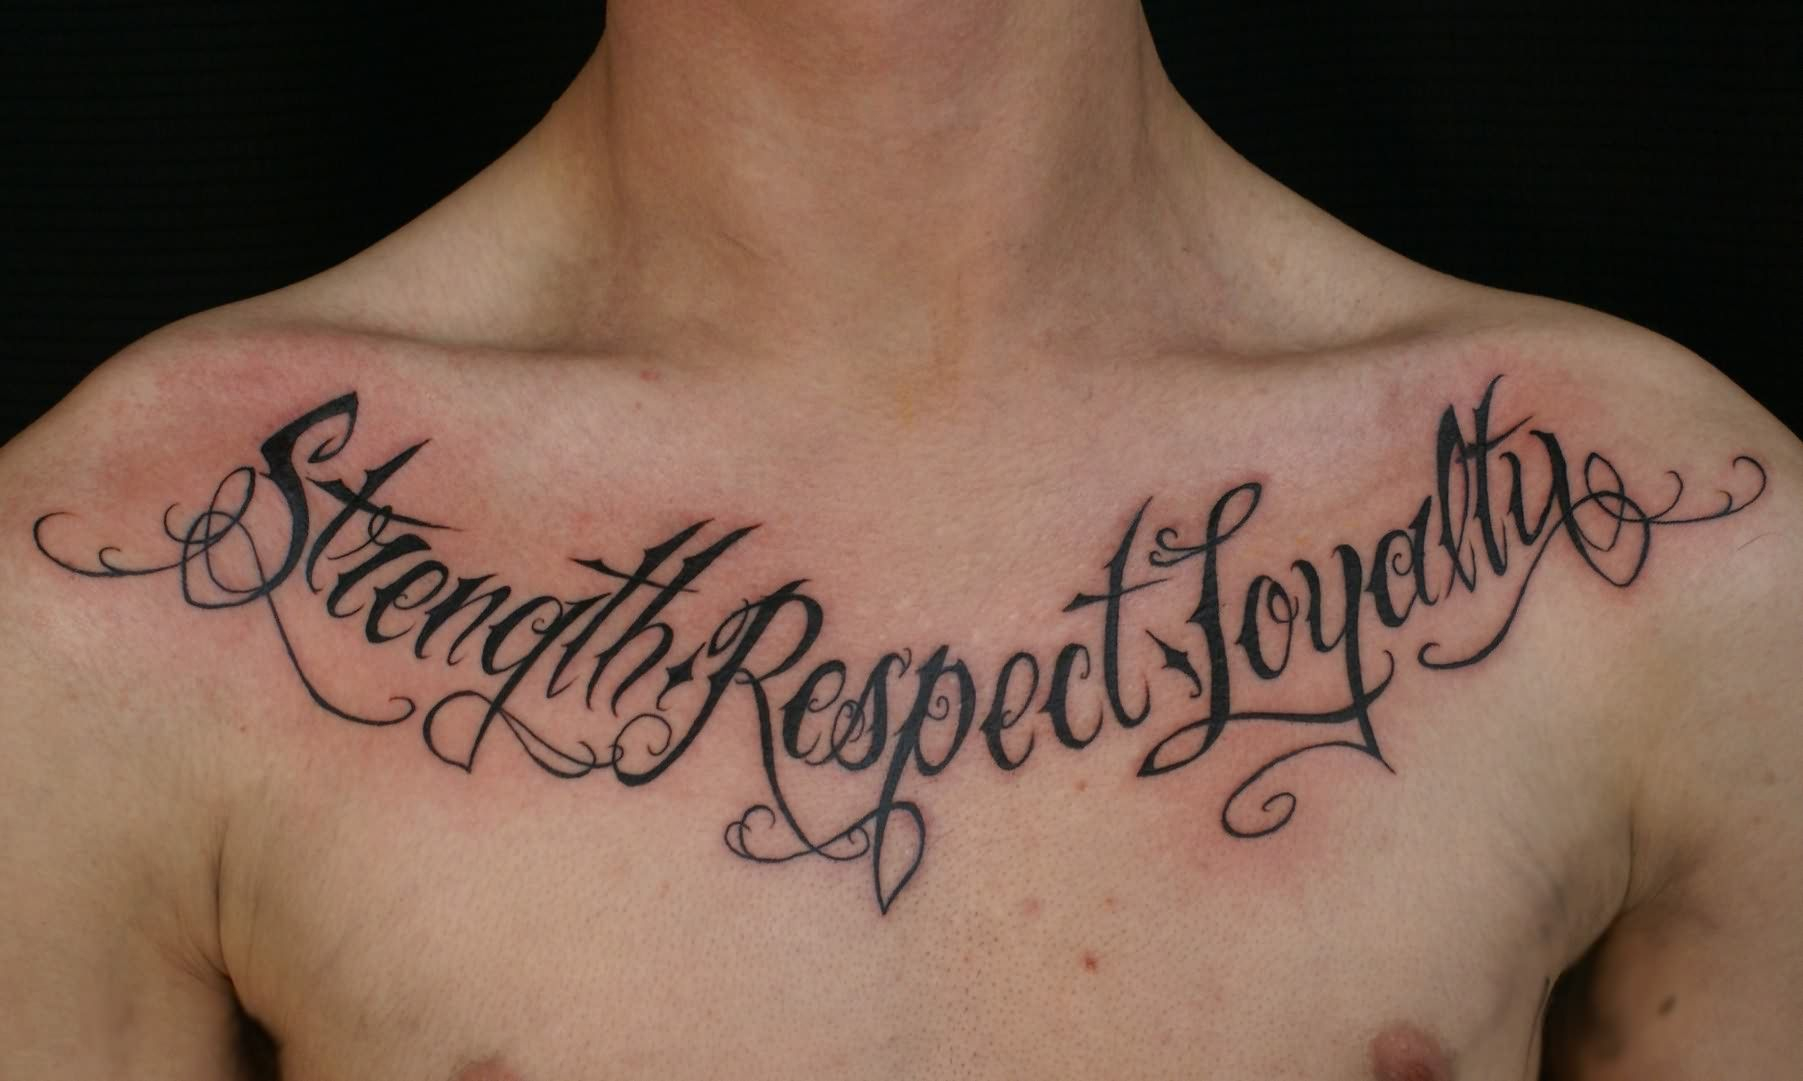 Strength Respect Loyalty Chest Lettering Tattoo Ideas For Ryan with dimensions 1803 X 1081